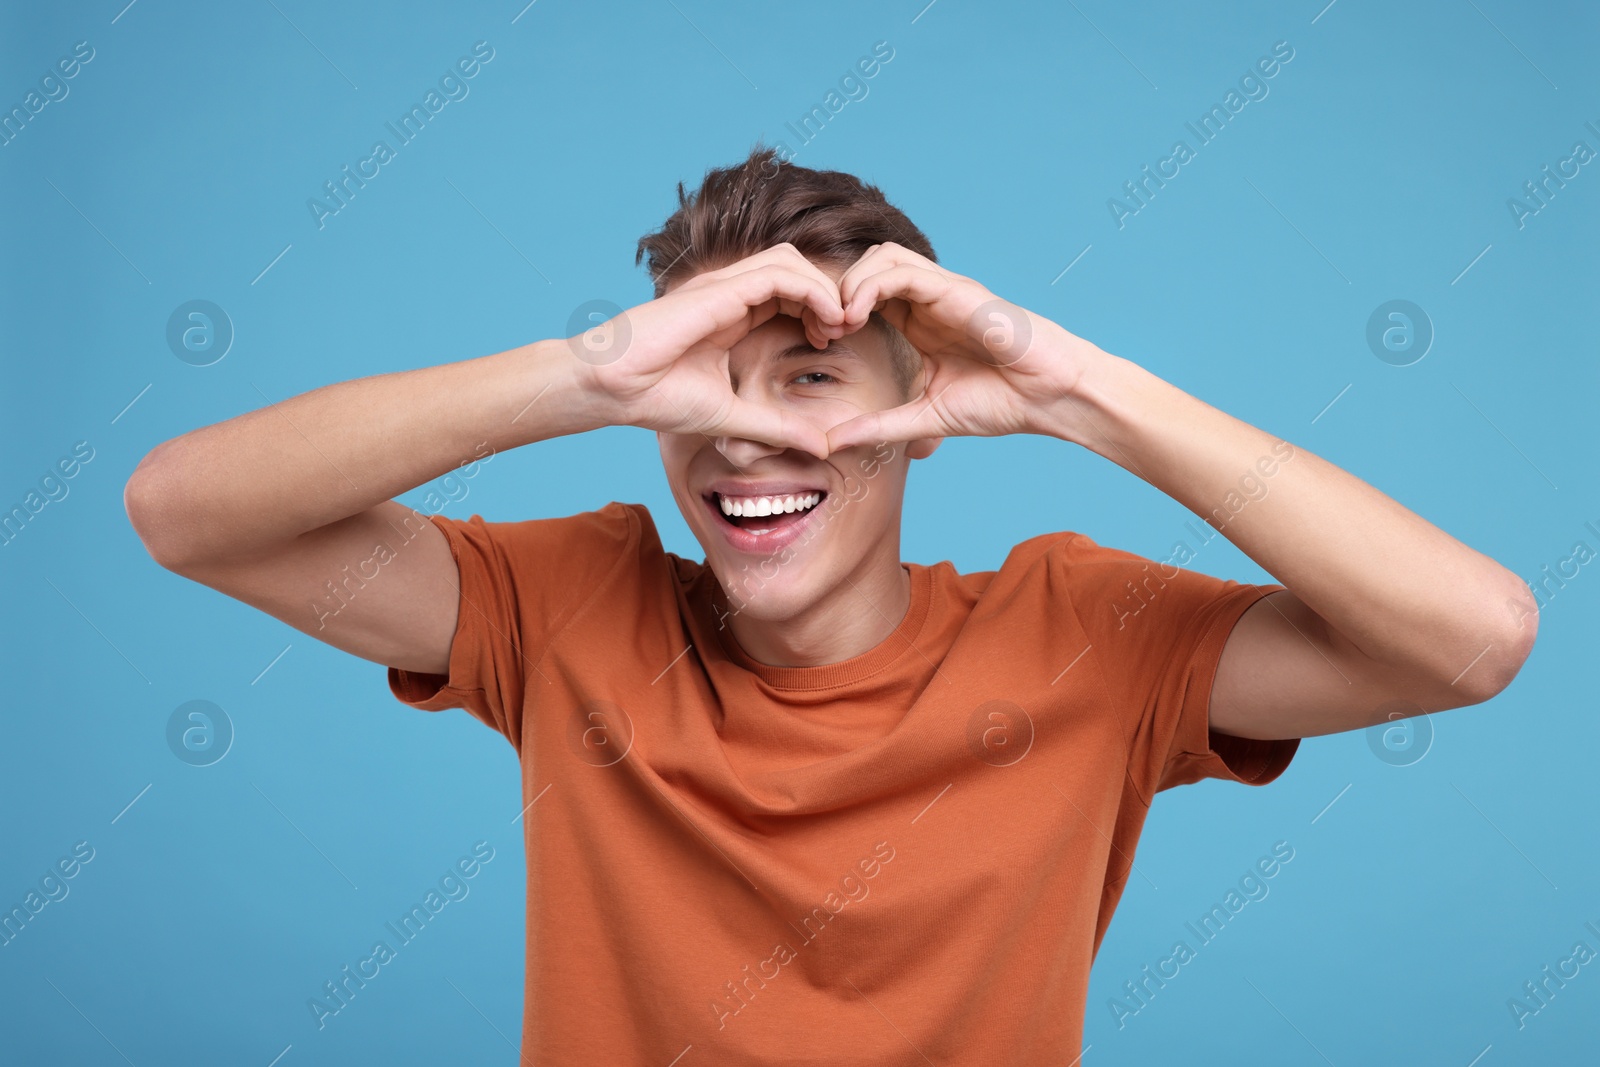 Photo of Happy man showing heart gesture with hands on light blue background